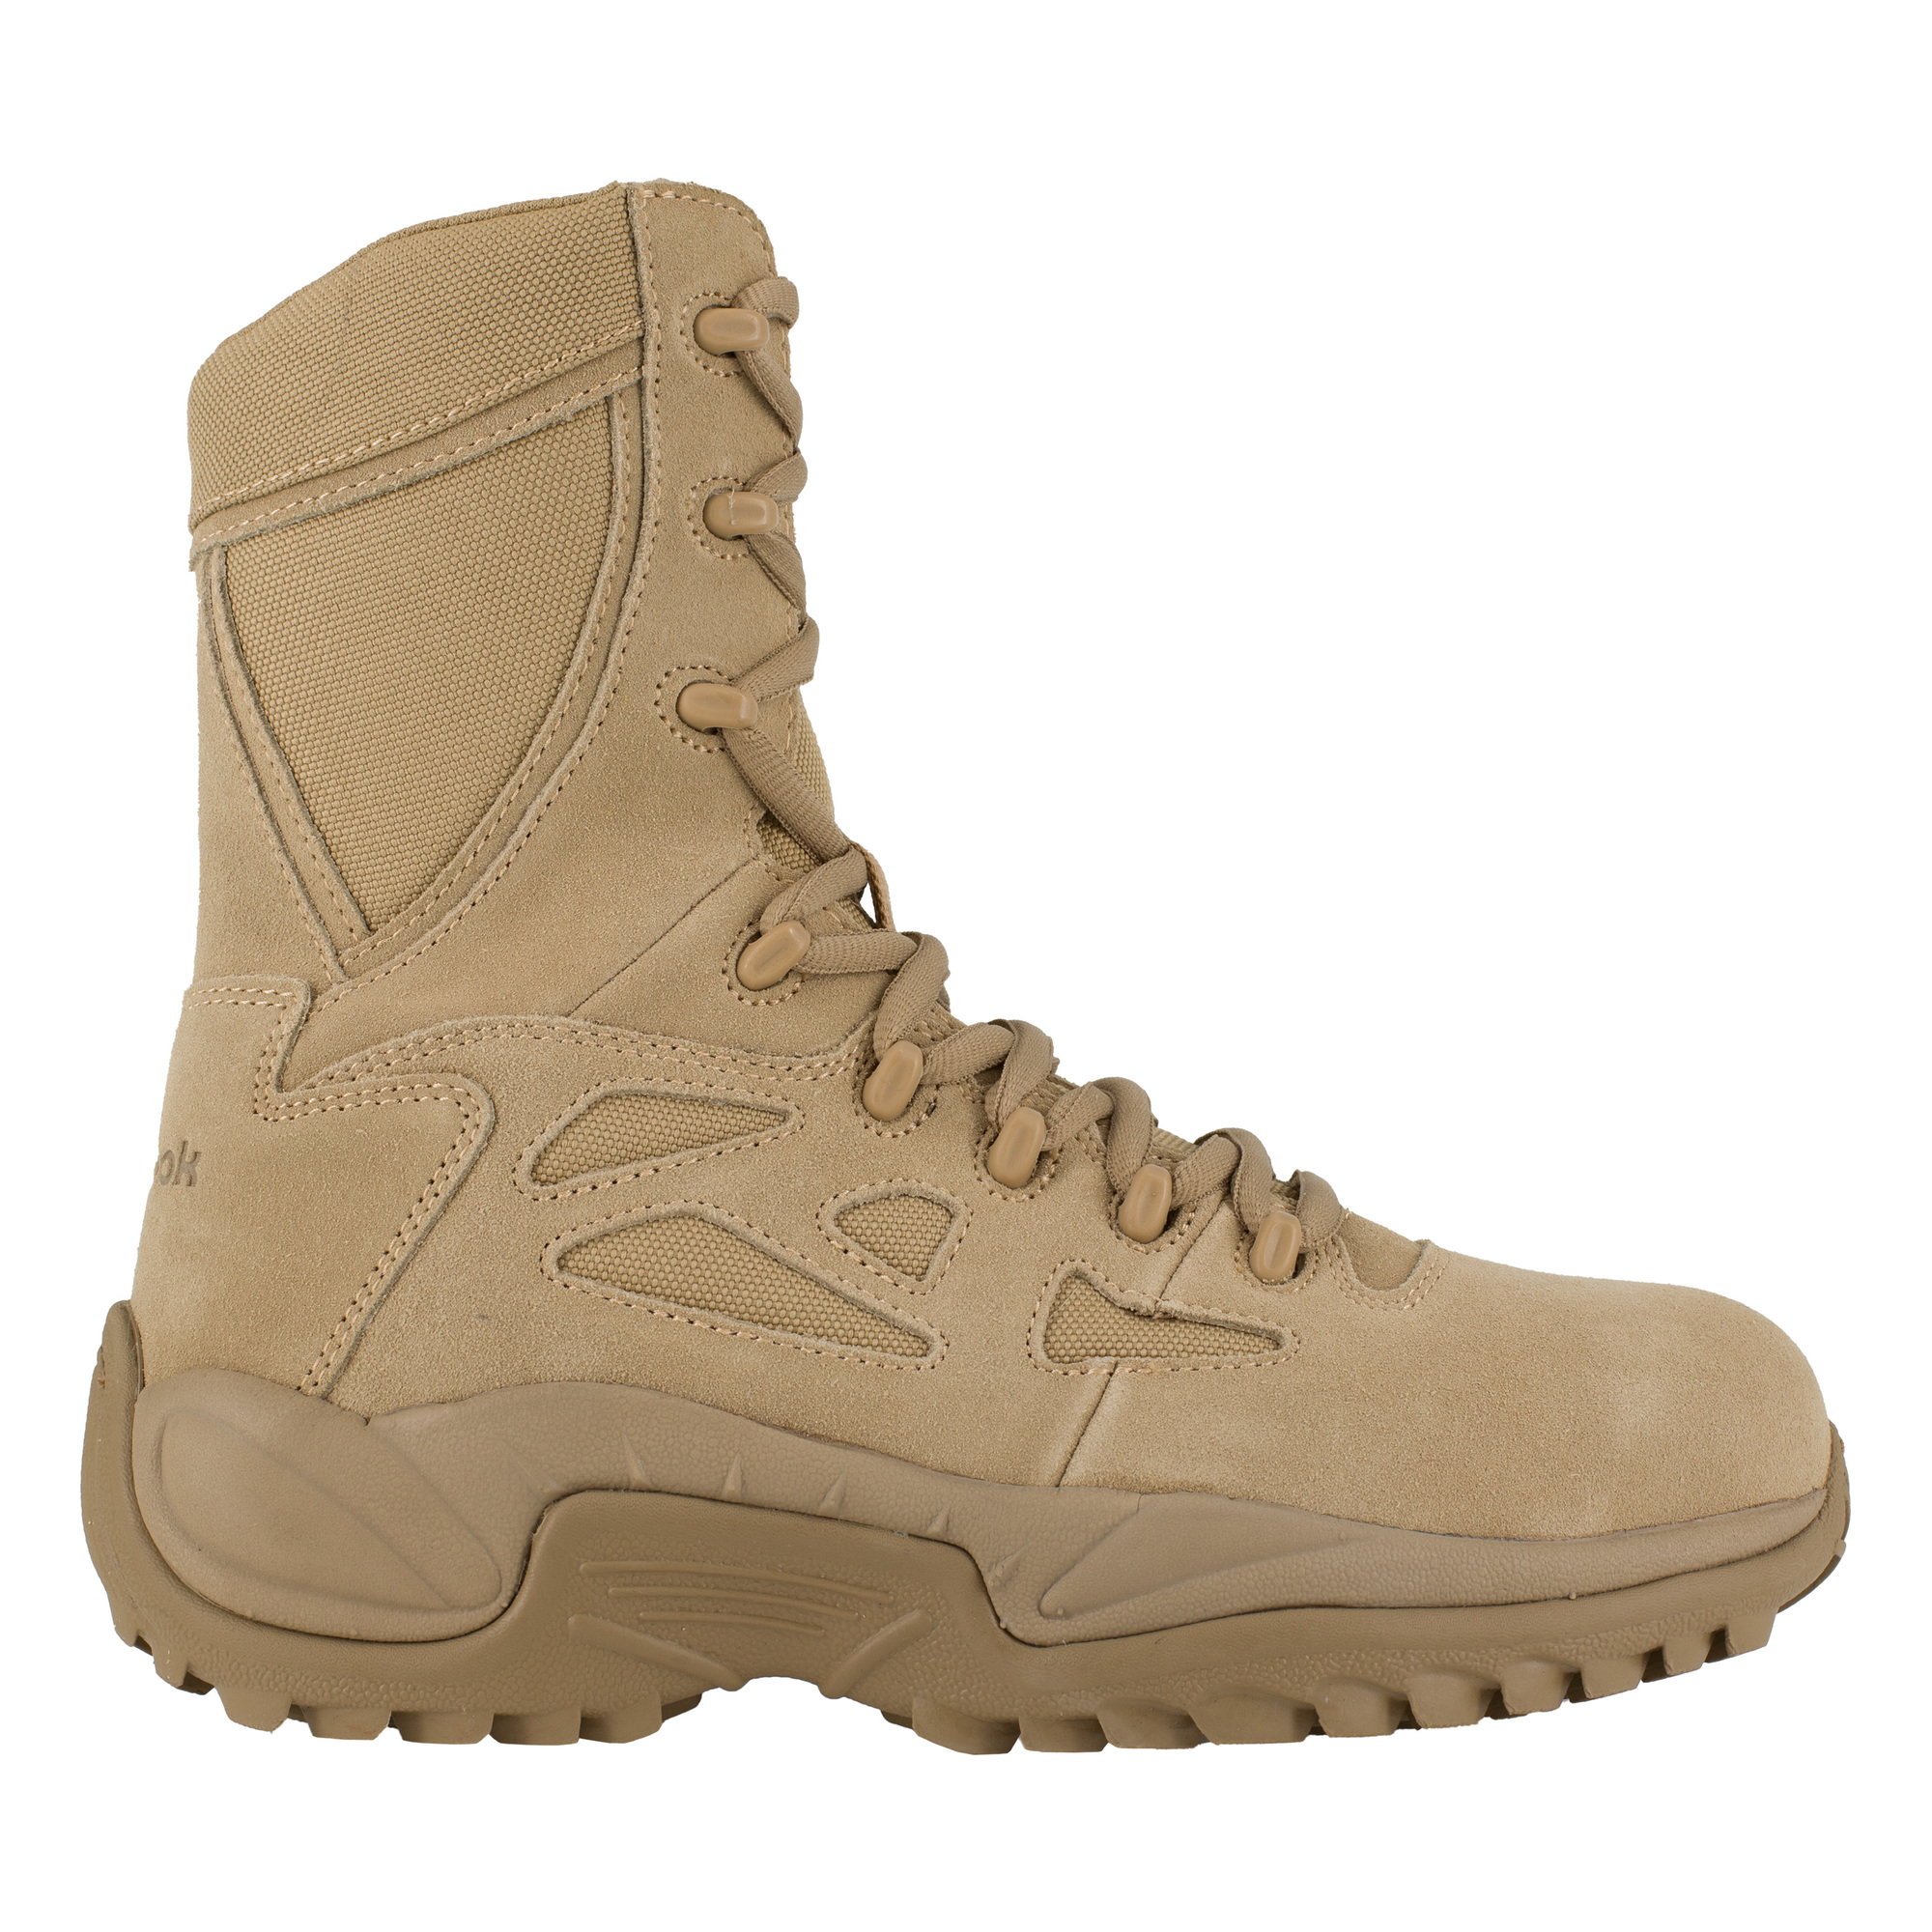 Reebok, 8Inch Stealth Tactical Boot with Side Zipper, Size 5, Width Medium, Color Desert Tan, Model RB894